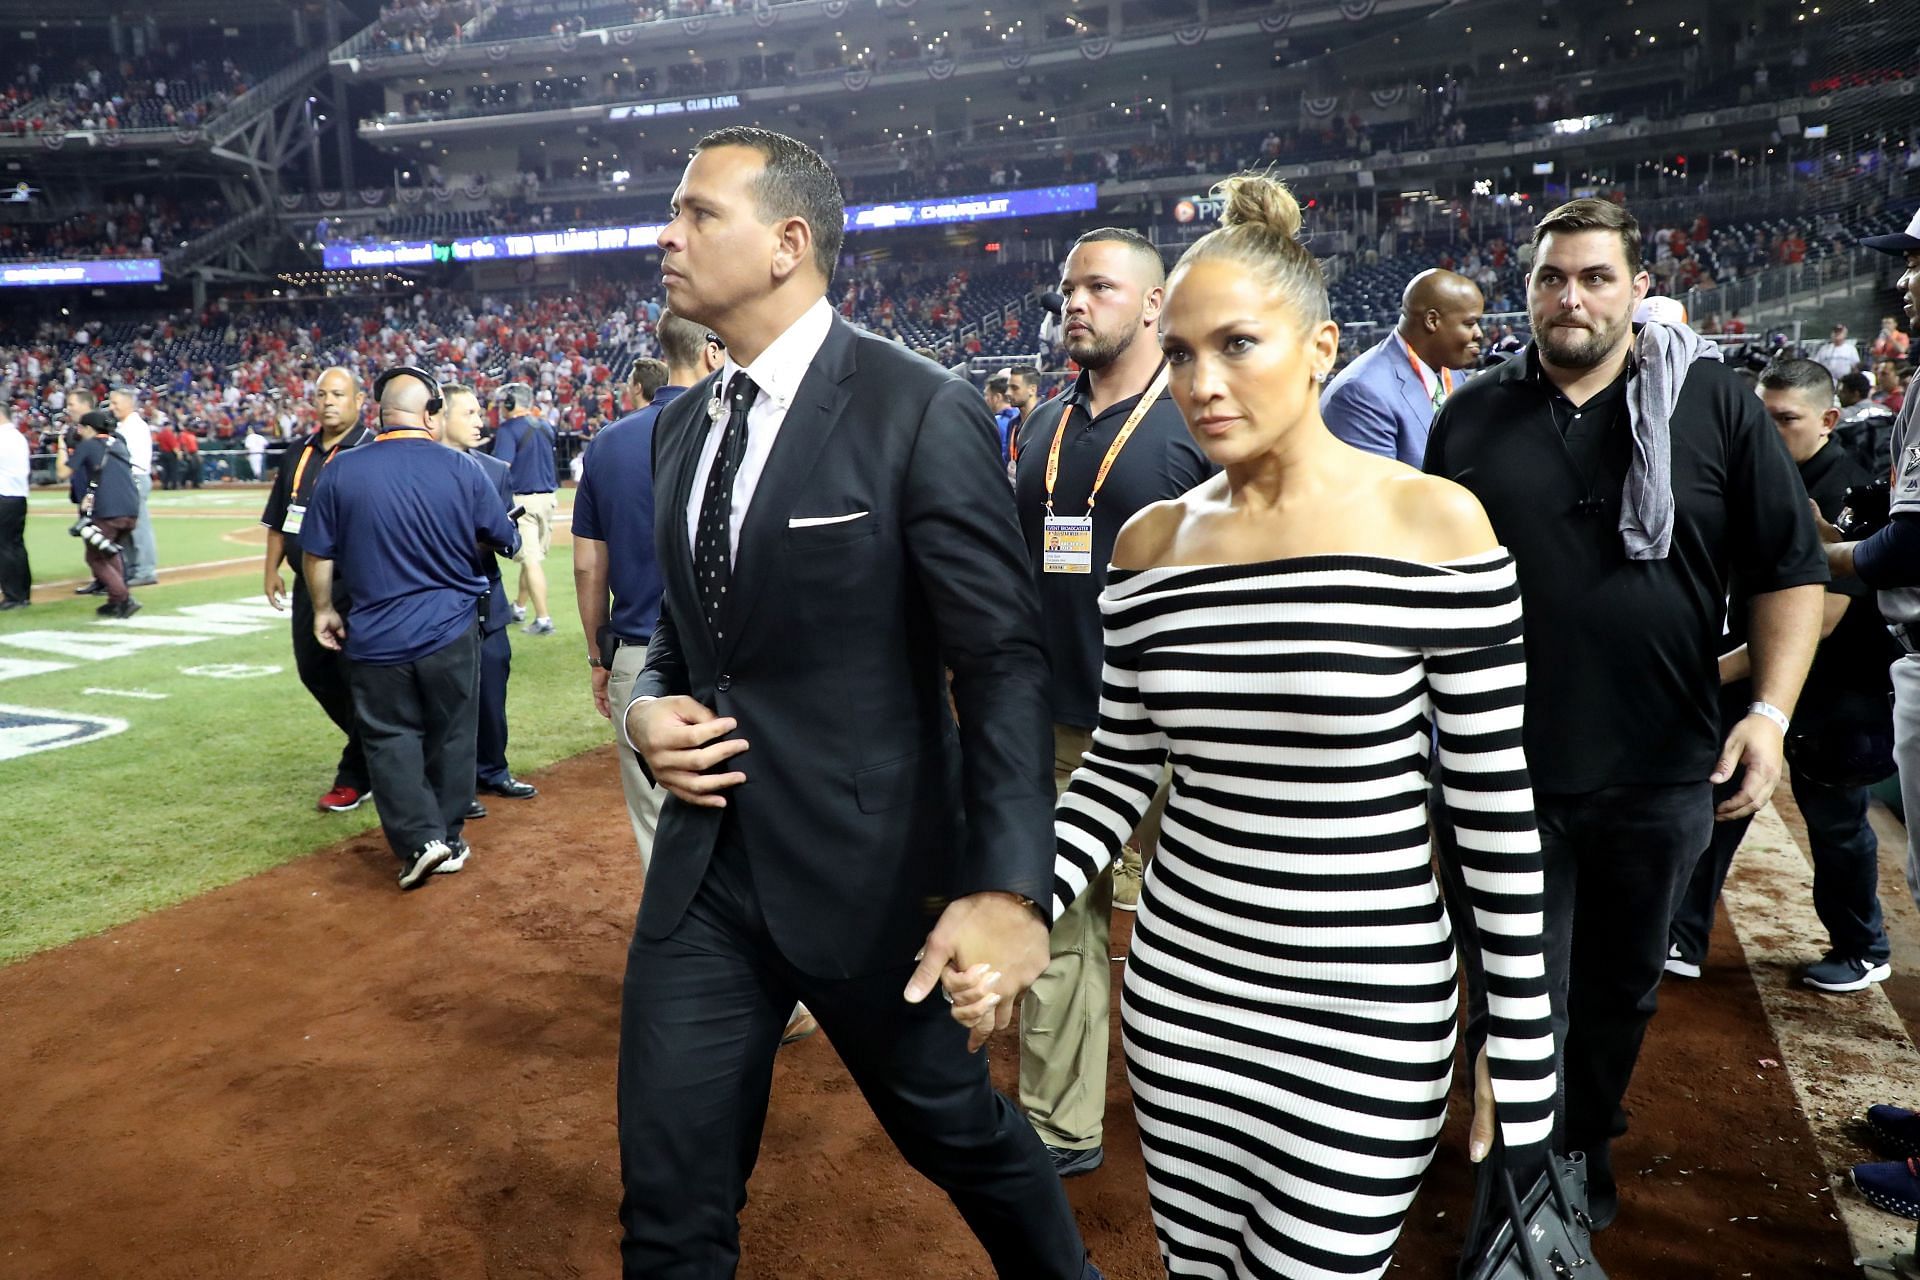 Jennifer Lopez and ex-fianc&eacute; Alex Rodriguez narrowly missed out on buying the New York Mets from billionaire Steve Cohen